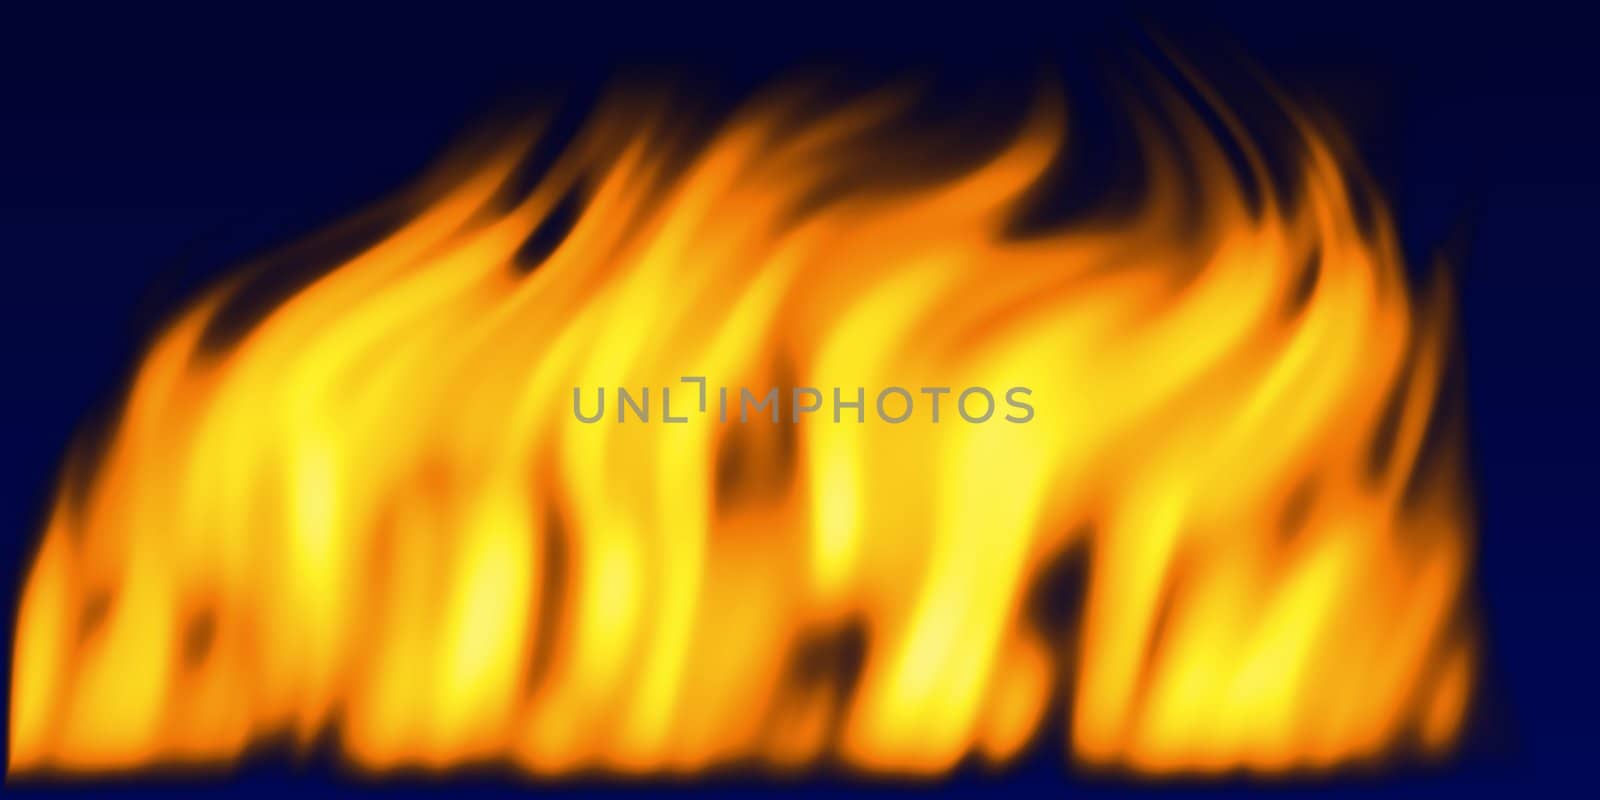 Abstract fire background by jbouzou